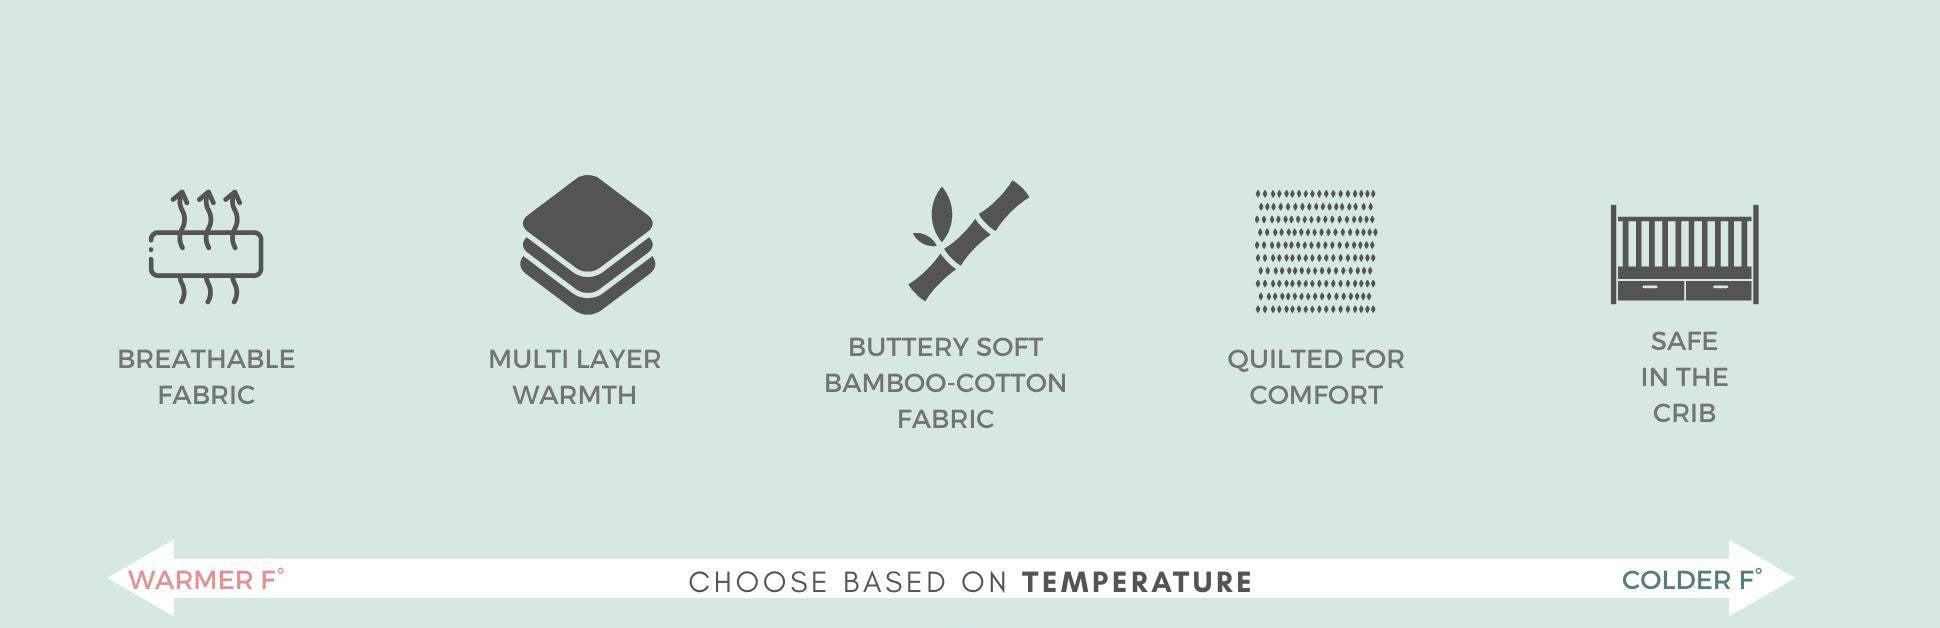 Choose based on temperature, breathable fabric, multi-layer warmth, buttery soft bamboo-cotton fabric, quilted for comfort, safe in the crib